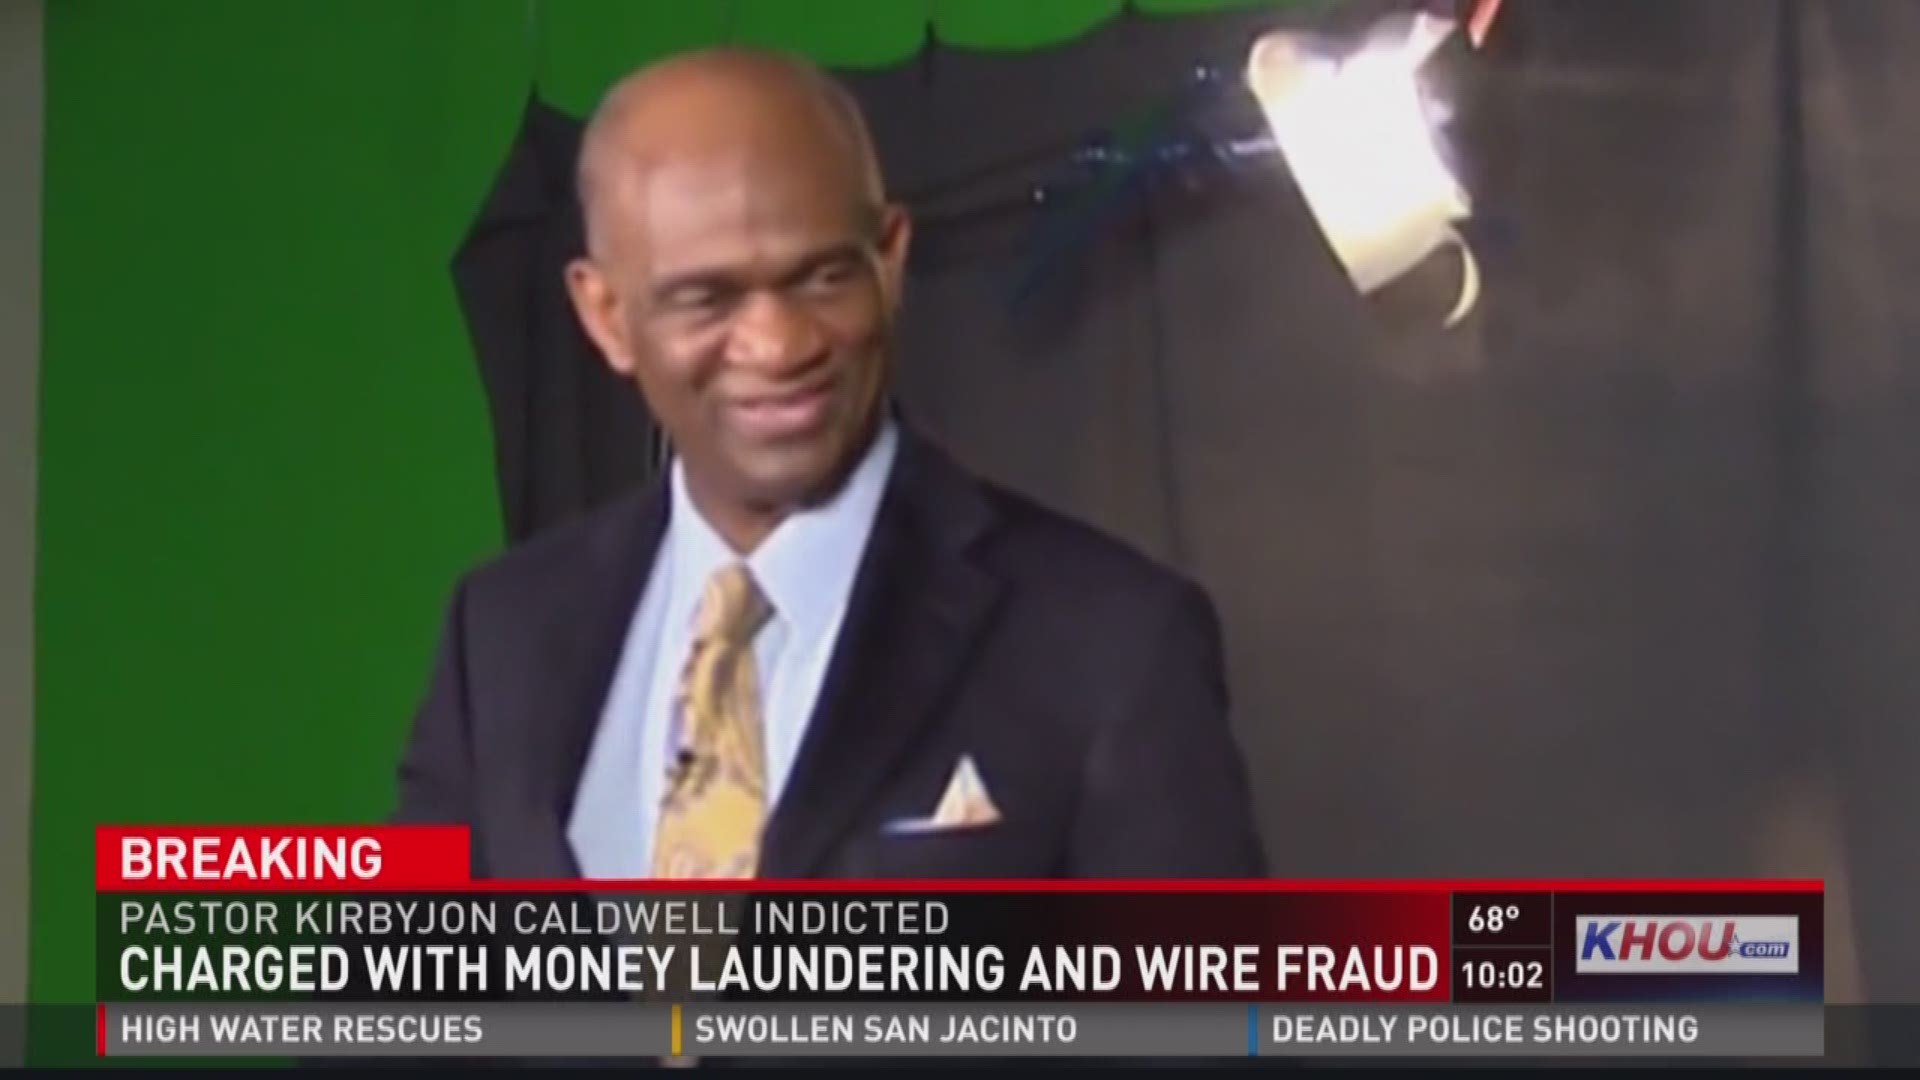 A prominent Houston pastor and a Louisiana financial planner have been accused of defrauding investors of more than $1 million.